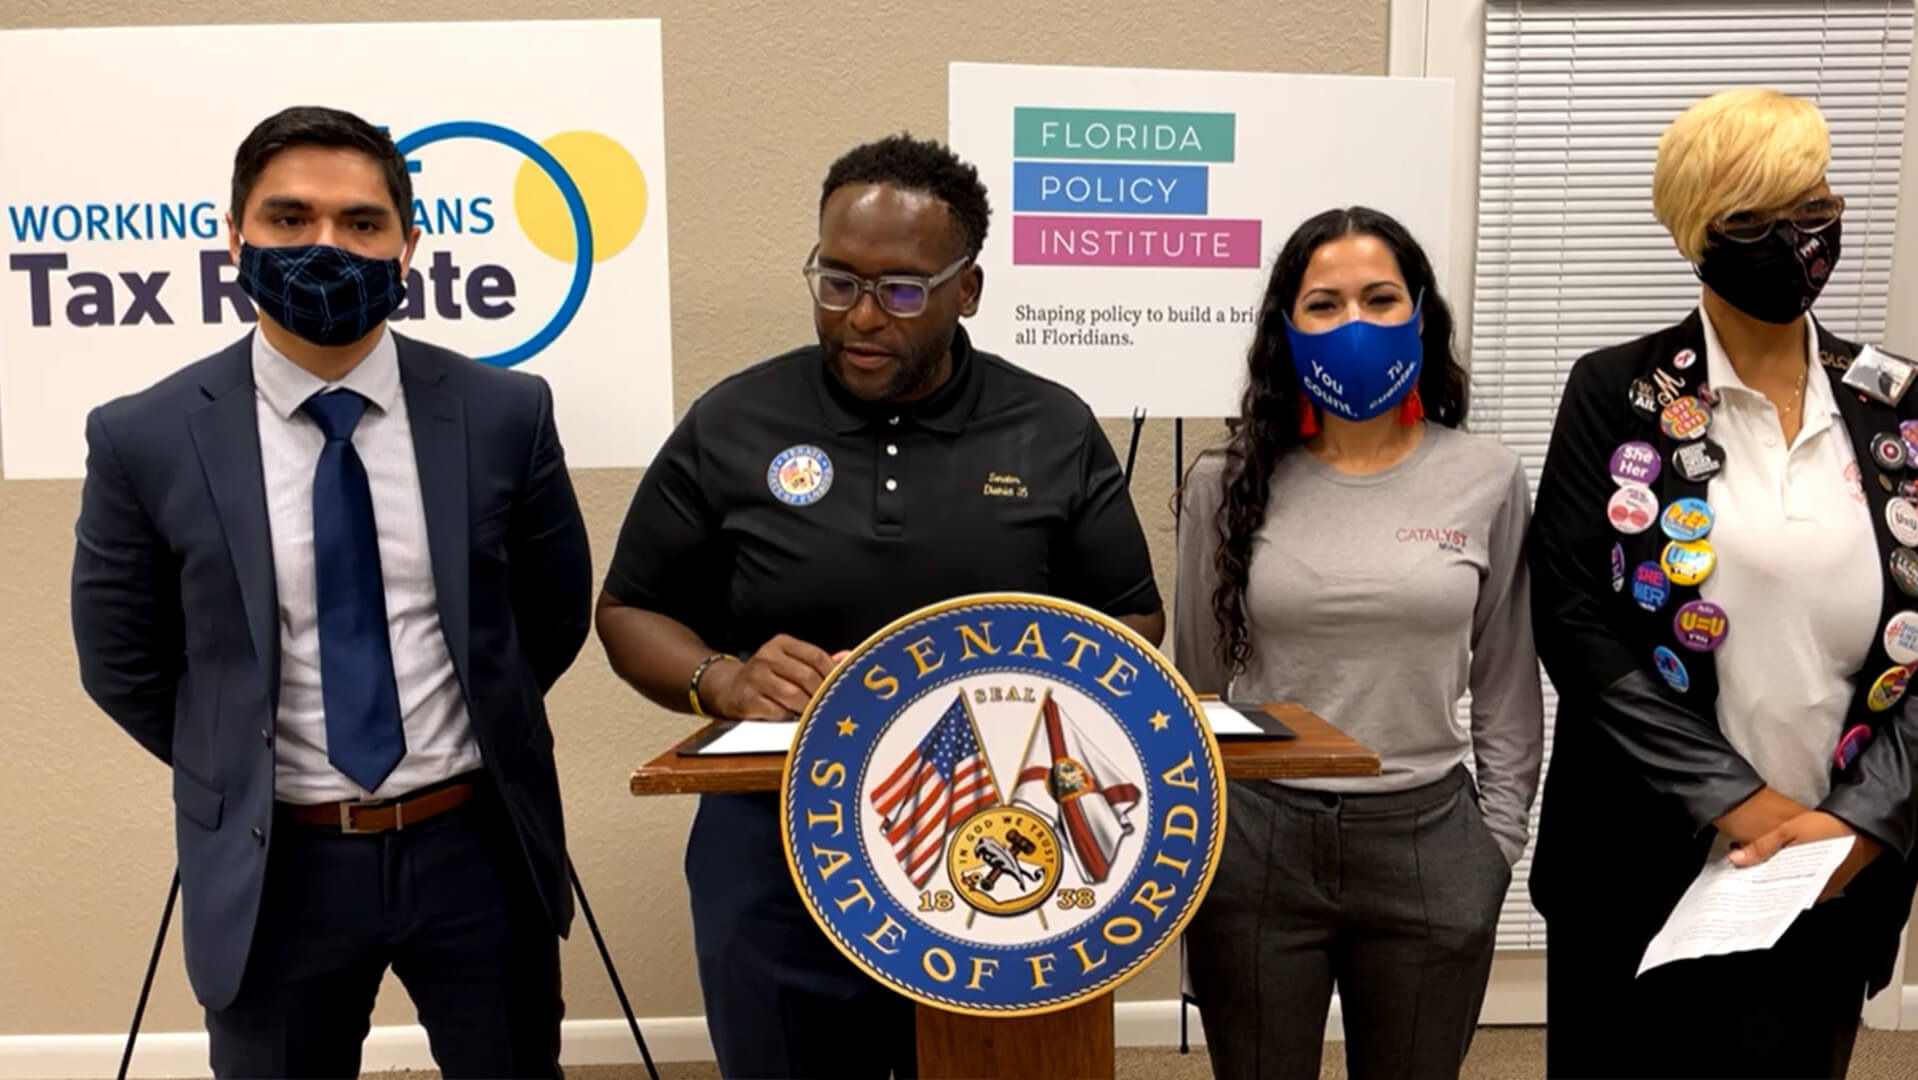 Press conference for the introduction of the Working Floridians Tax Rebate bill, 2021. Senator Shevrin Jones (second from left) with representatives (left to right) from Florida Policy Institute, Catalyst Miami, and the Miami community